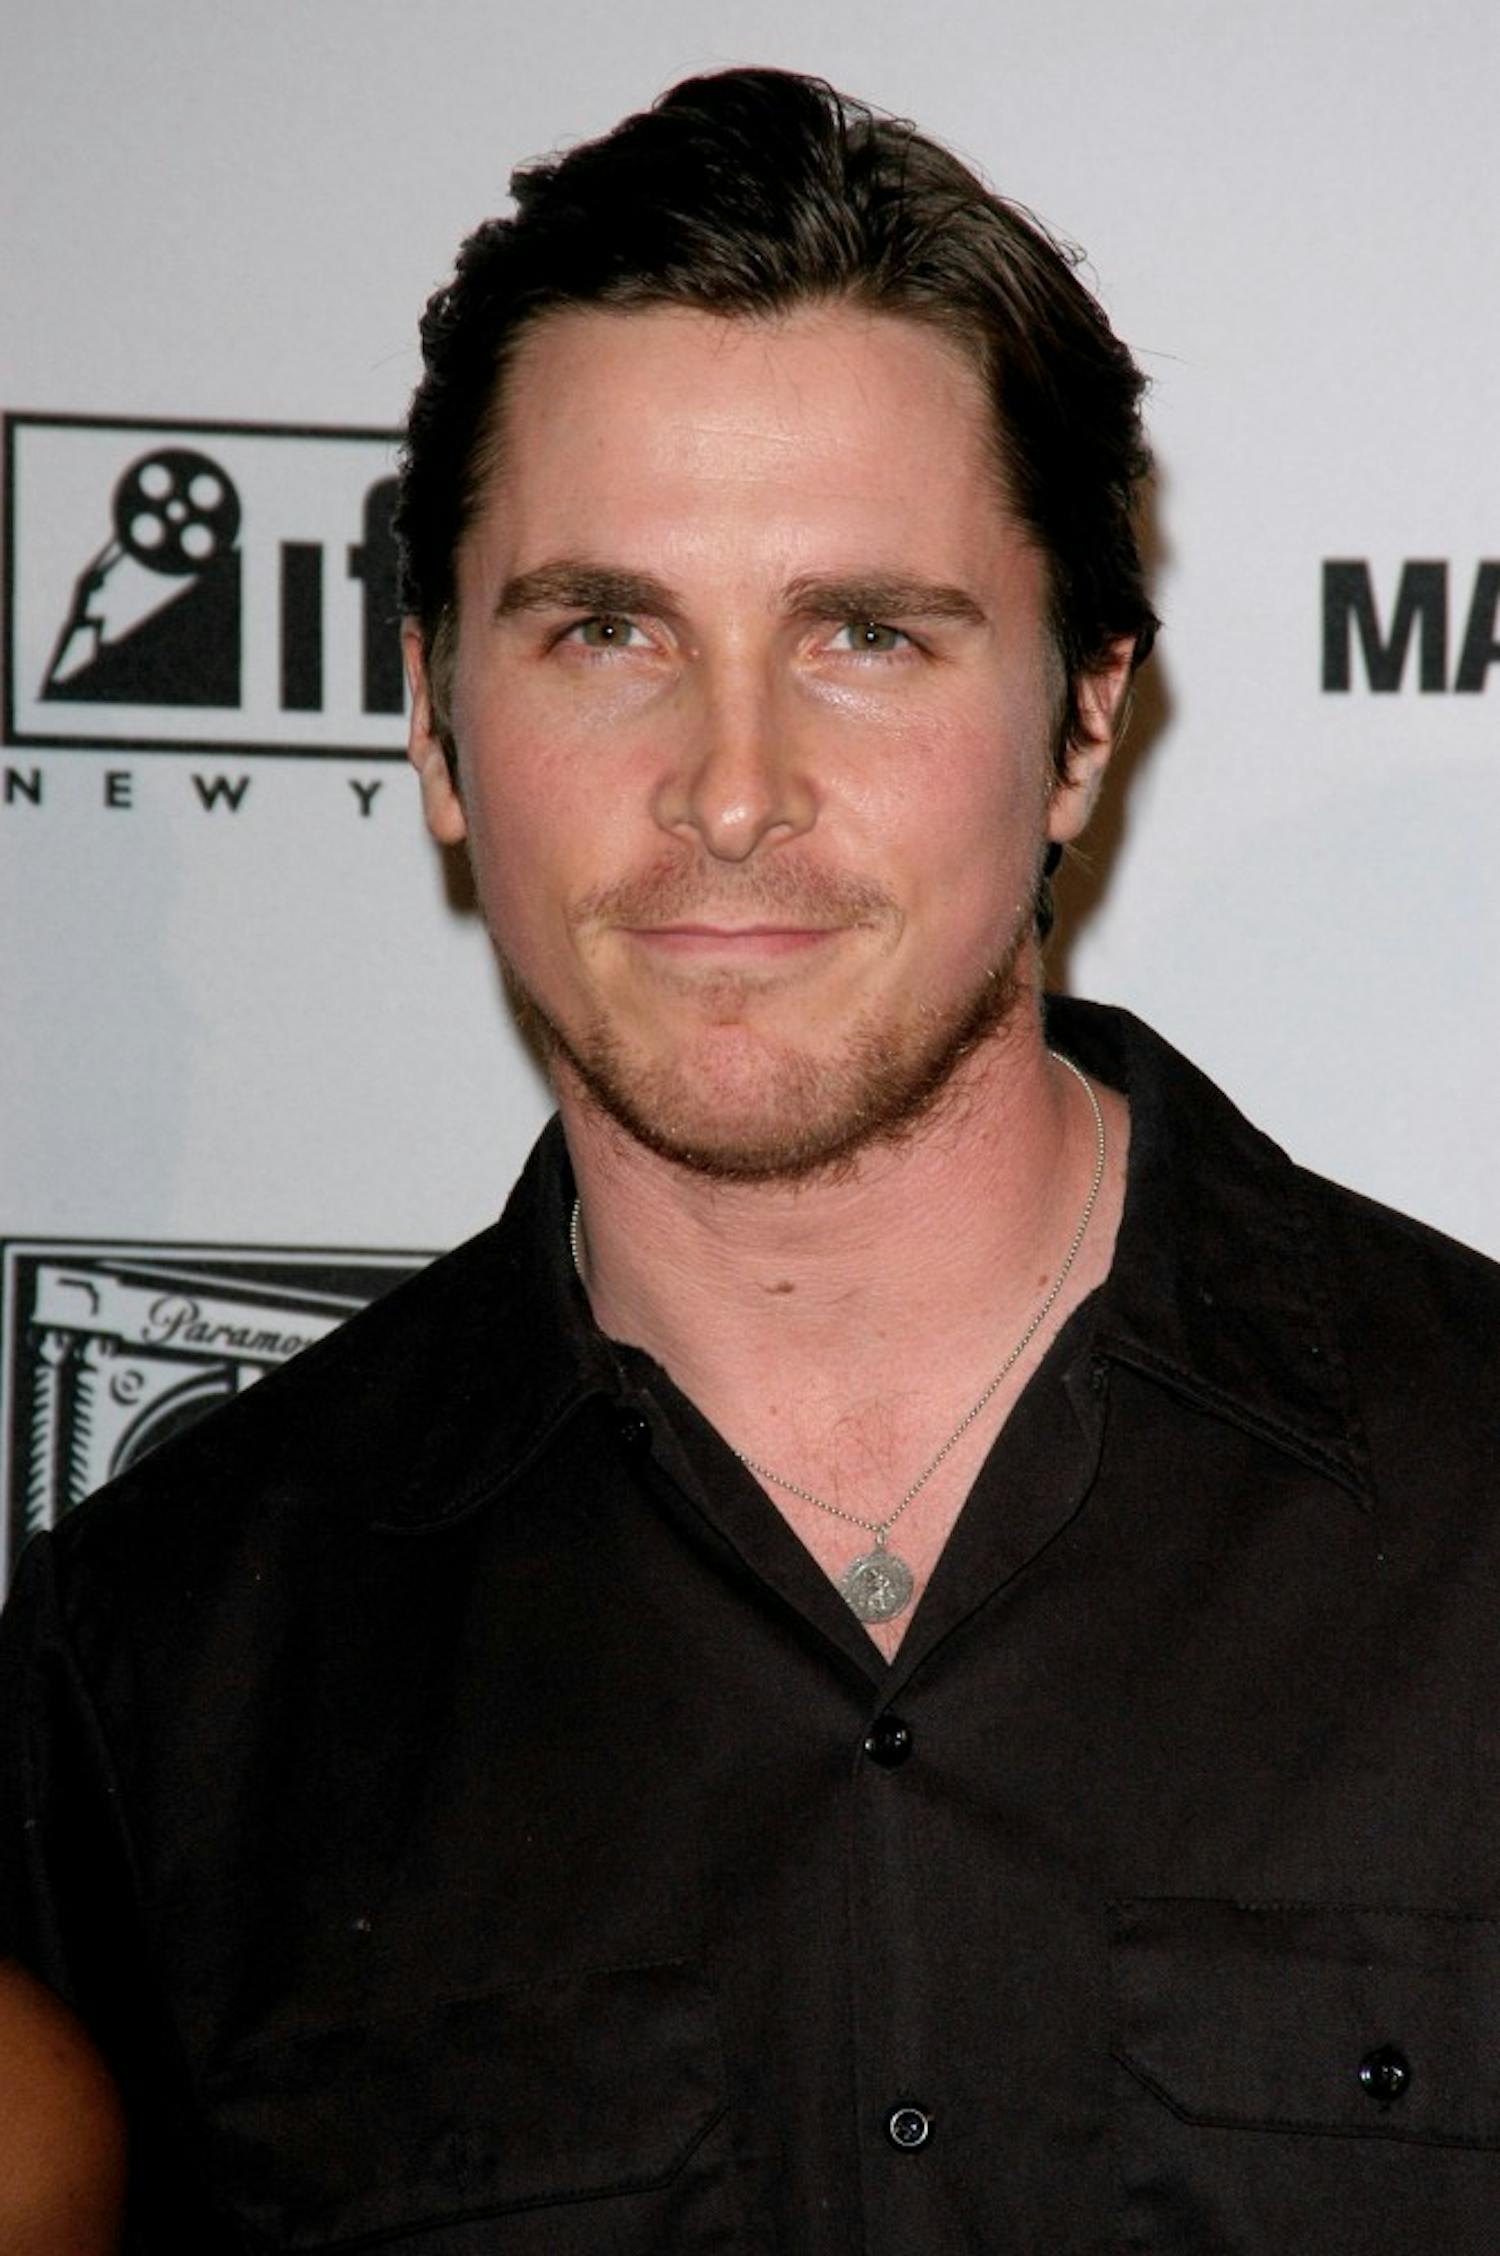 KRT STAND ALONE ENTERTAINMENT PHOTO SLUGGED: MACHINIST KRT PHOTOGRAPH BY ANTOINE CAU/ABACA PRESS (September 20) Christian Bale attends the world premiere of "The Machinist" in New York, on September 20, 2004. (cdm) 2004